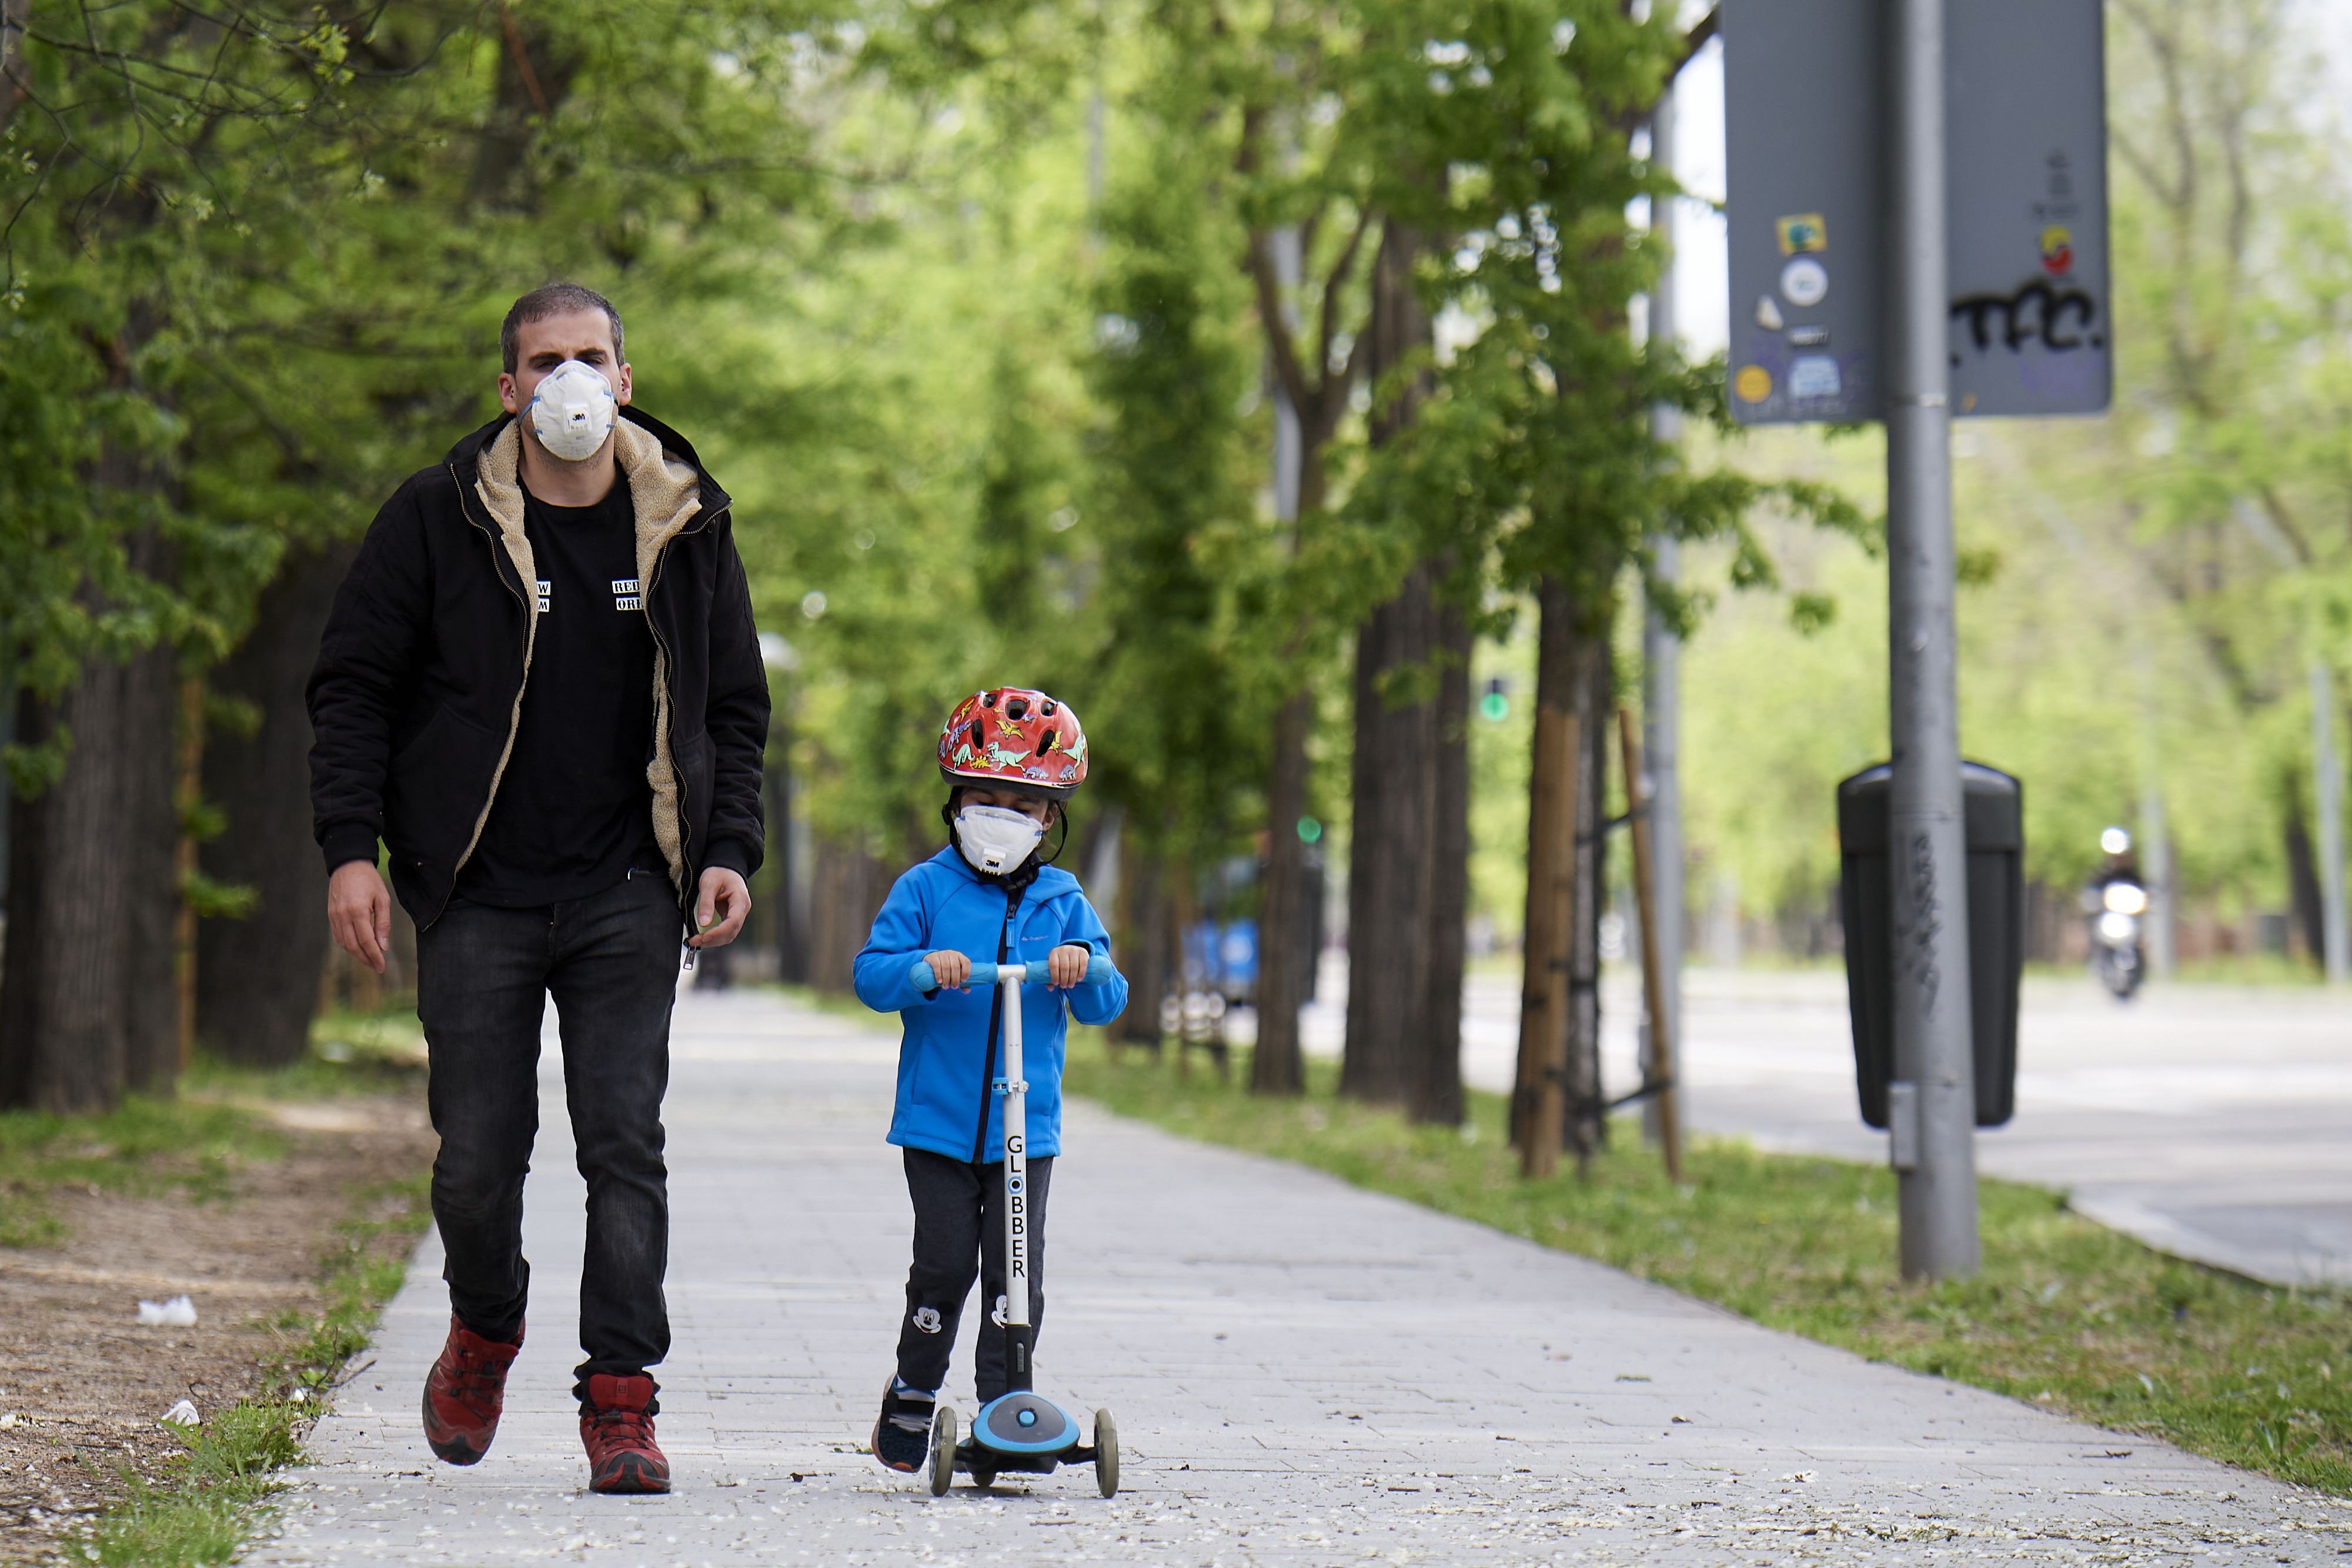 In this image, a boy wears a mask on his scooter while walking with a masked man 